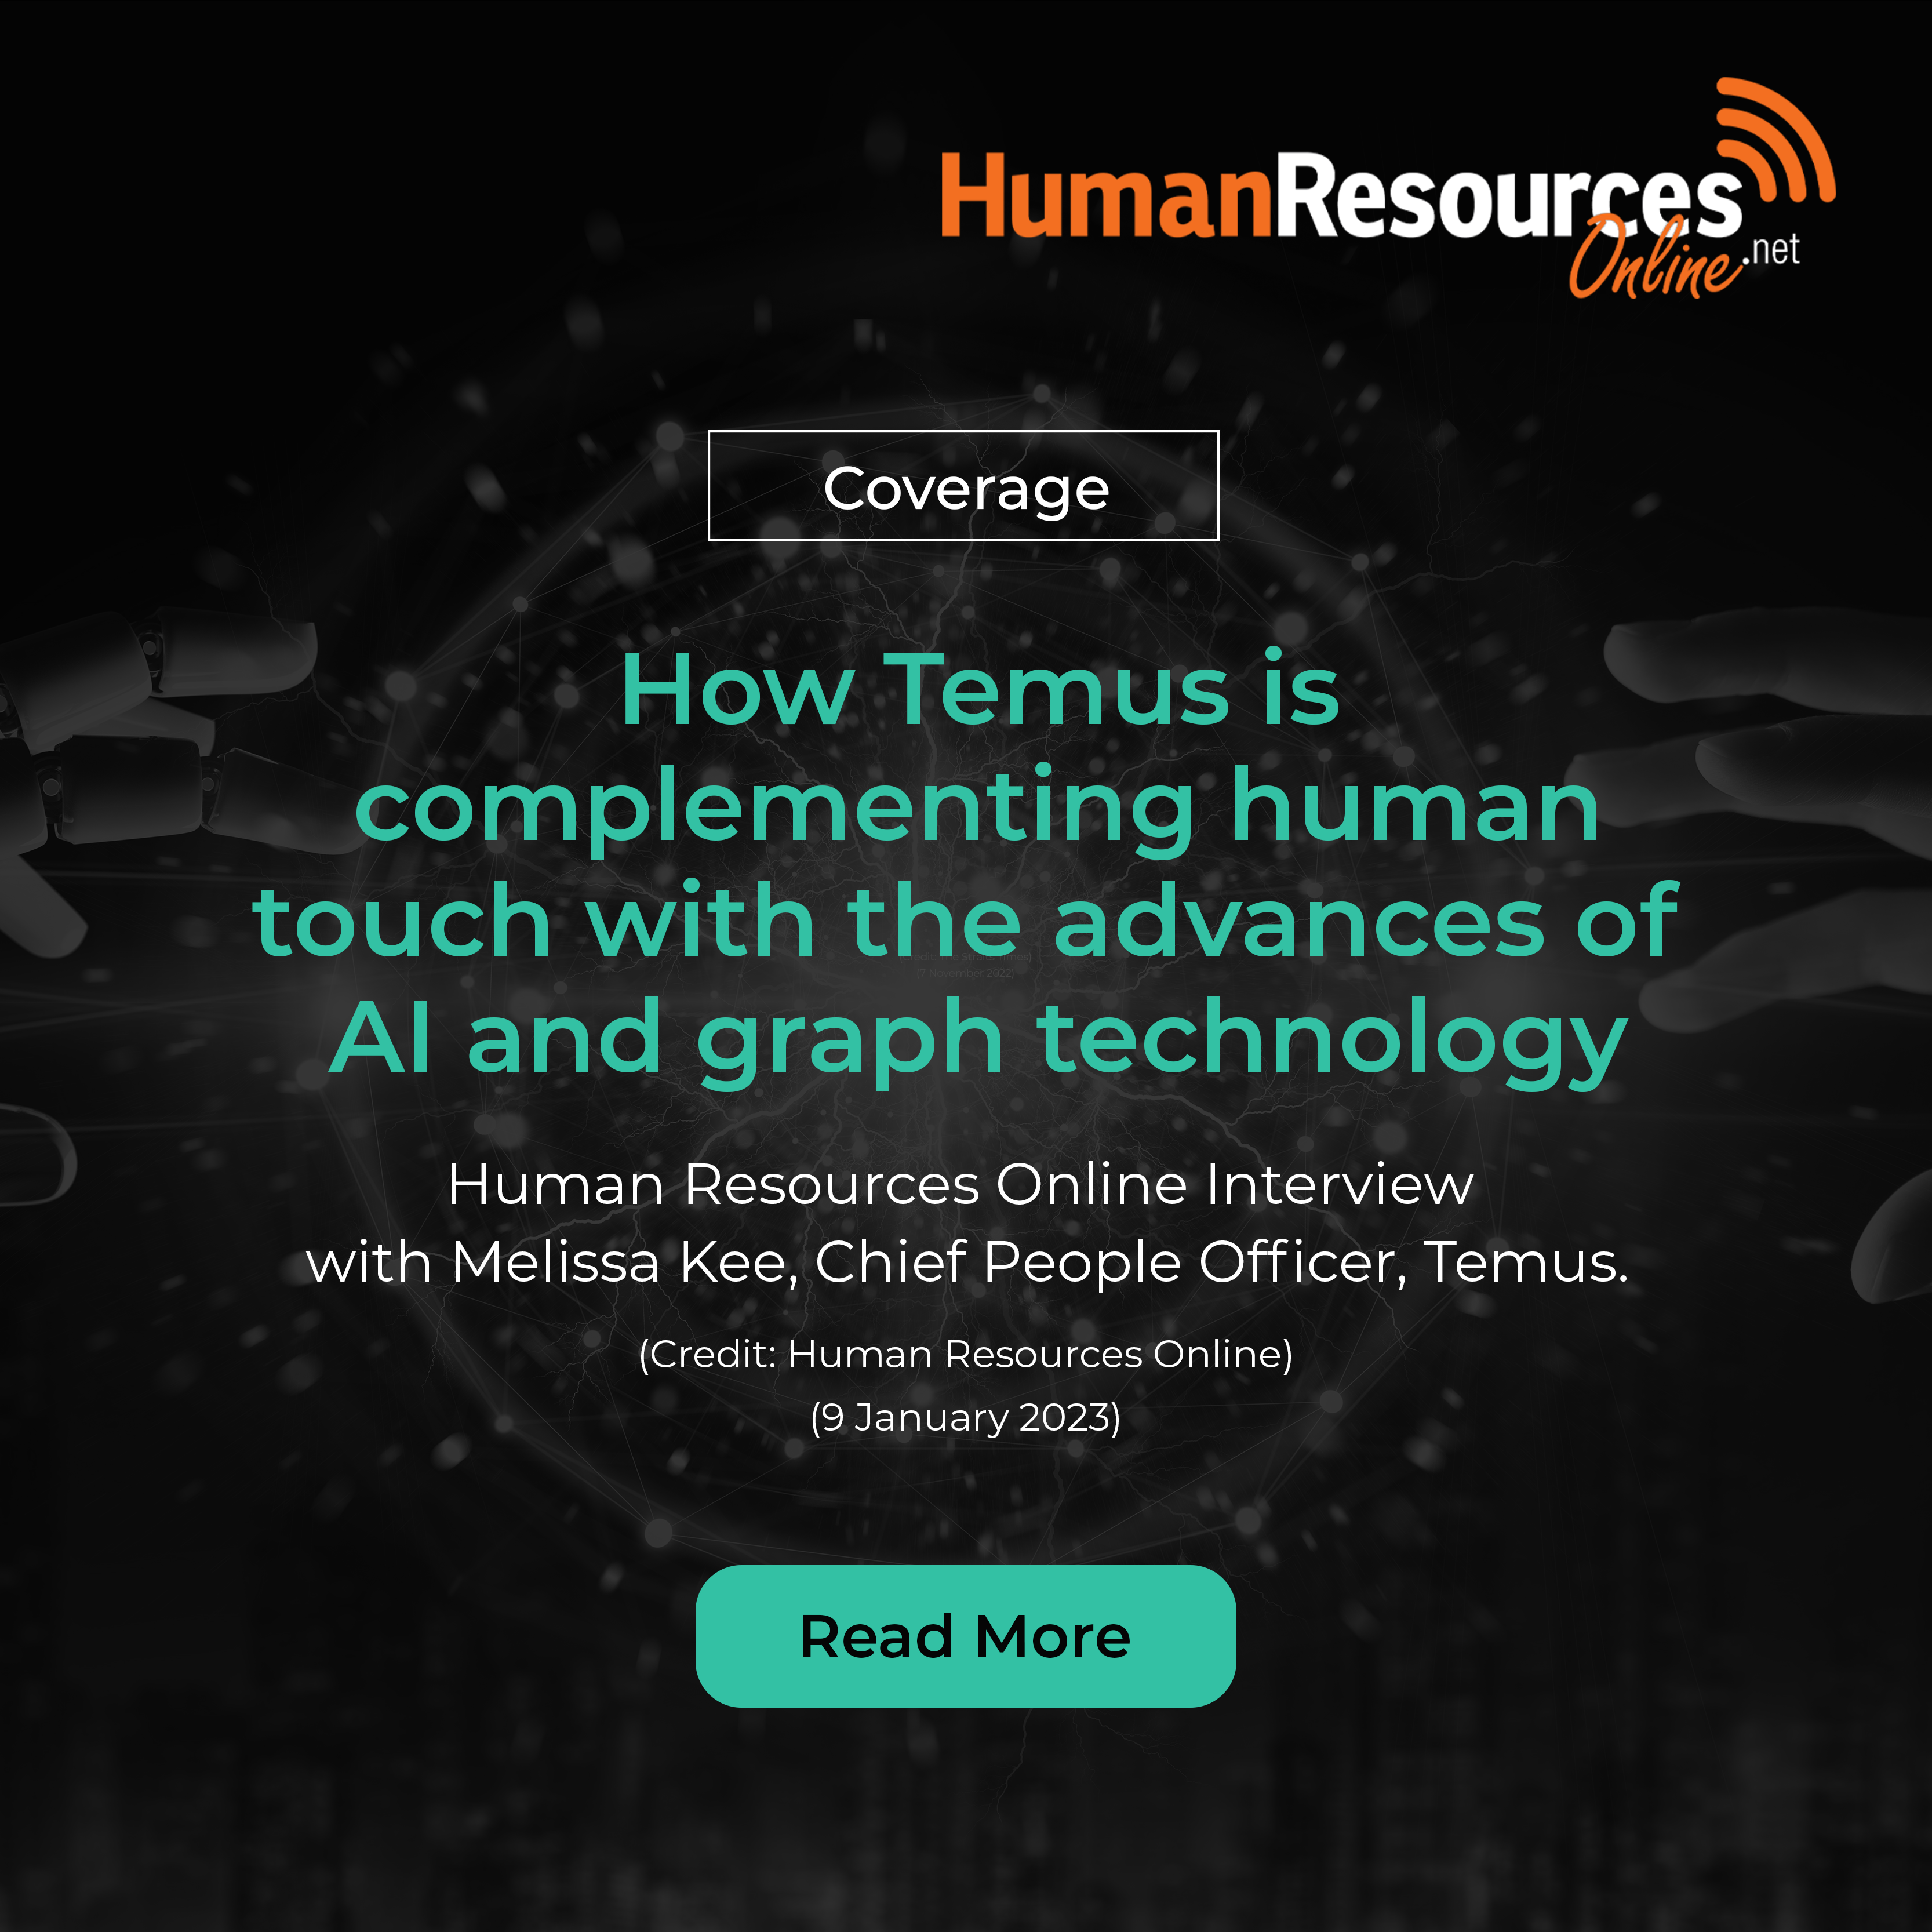 Coverage: How Temus is Complementing Human Touch with the Advances of AI and Graph Technology